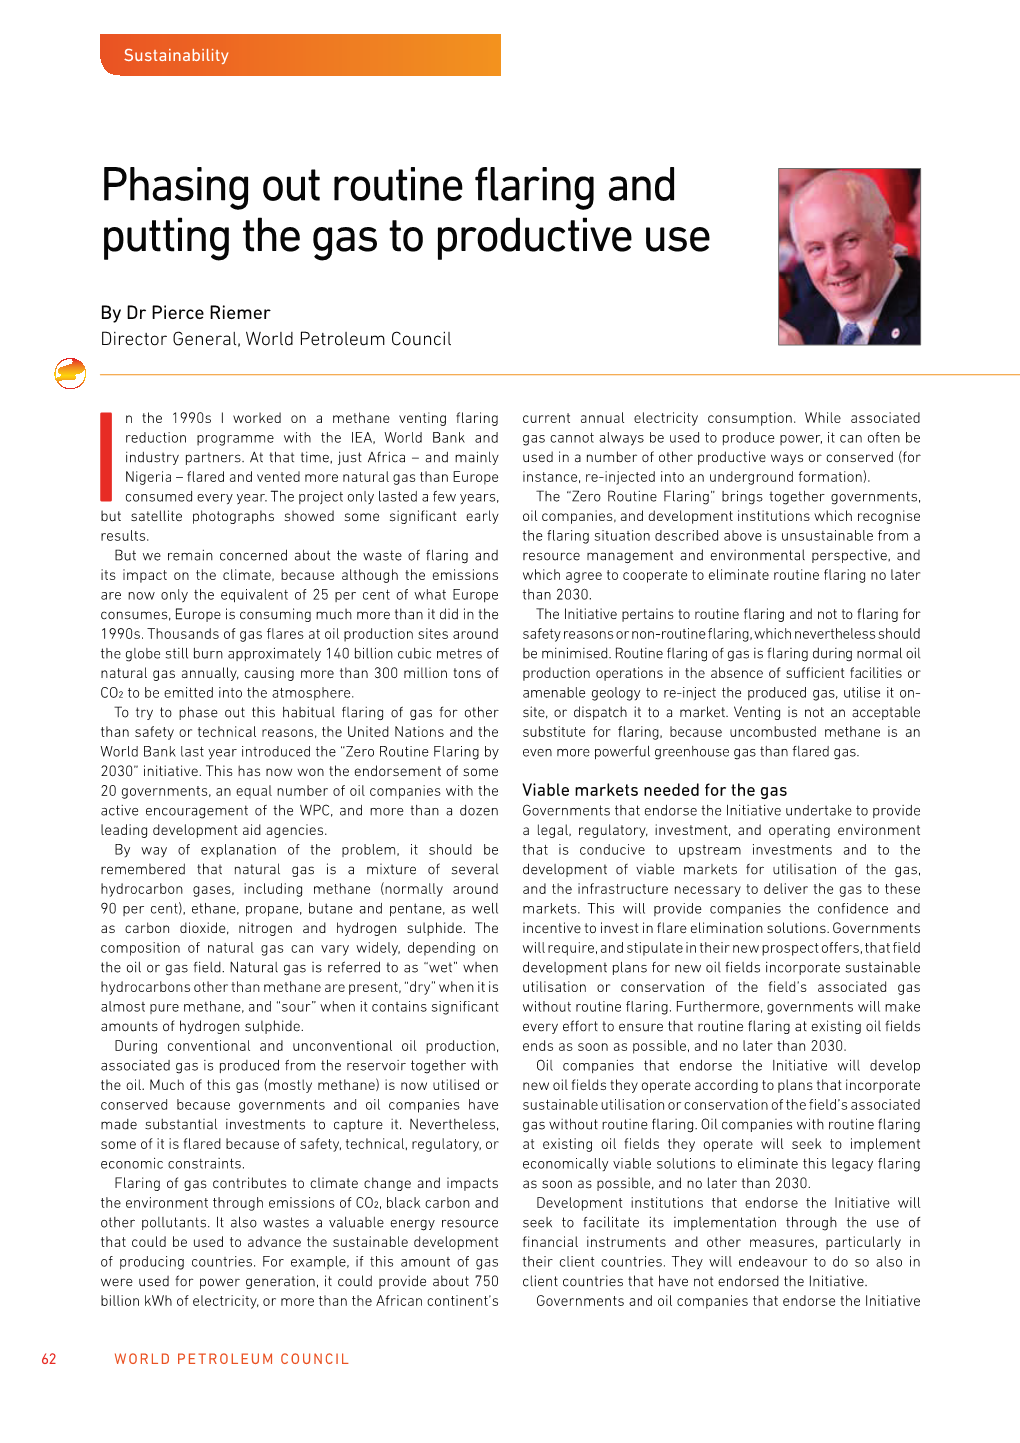 Phasing out Routine Flaring and Putting the Gas to Productive Use